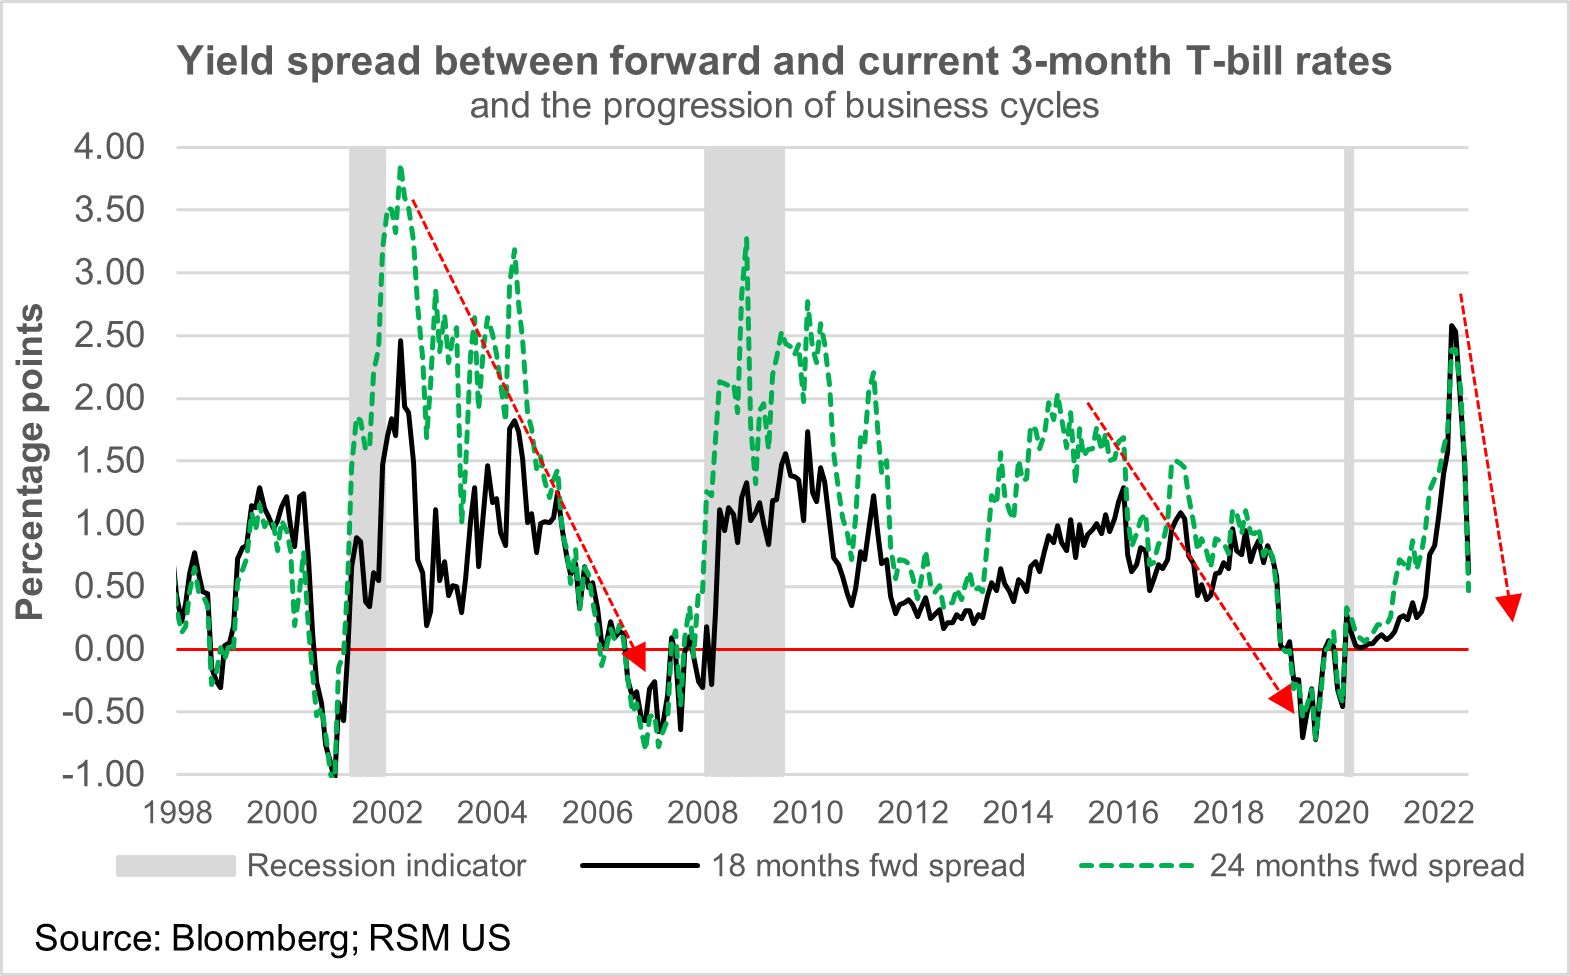 A chart shows the yield spread between forward and current three-month T-bill rates from 1998 to present